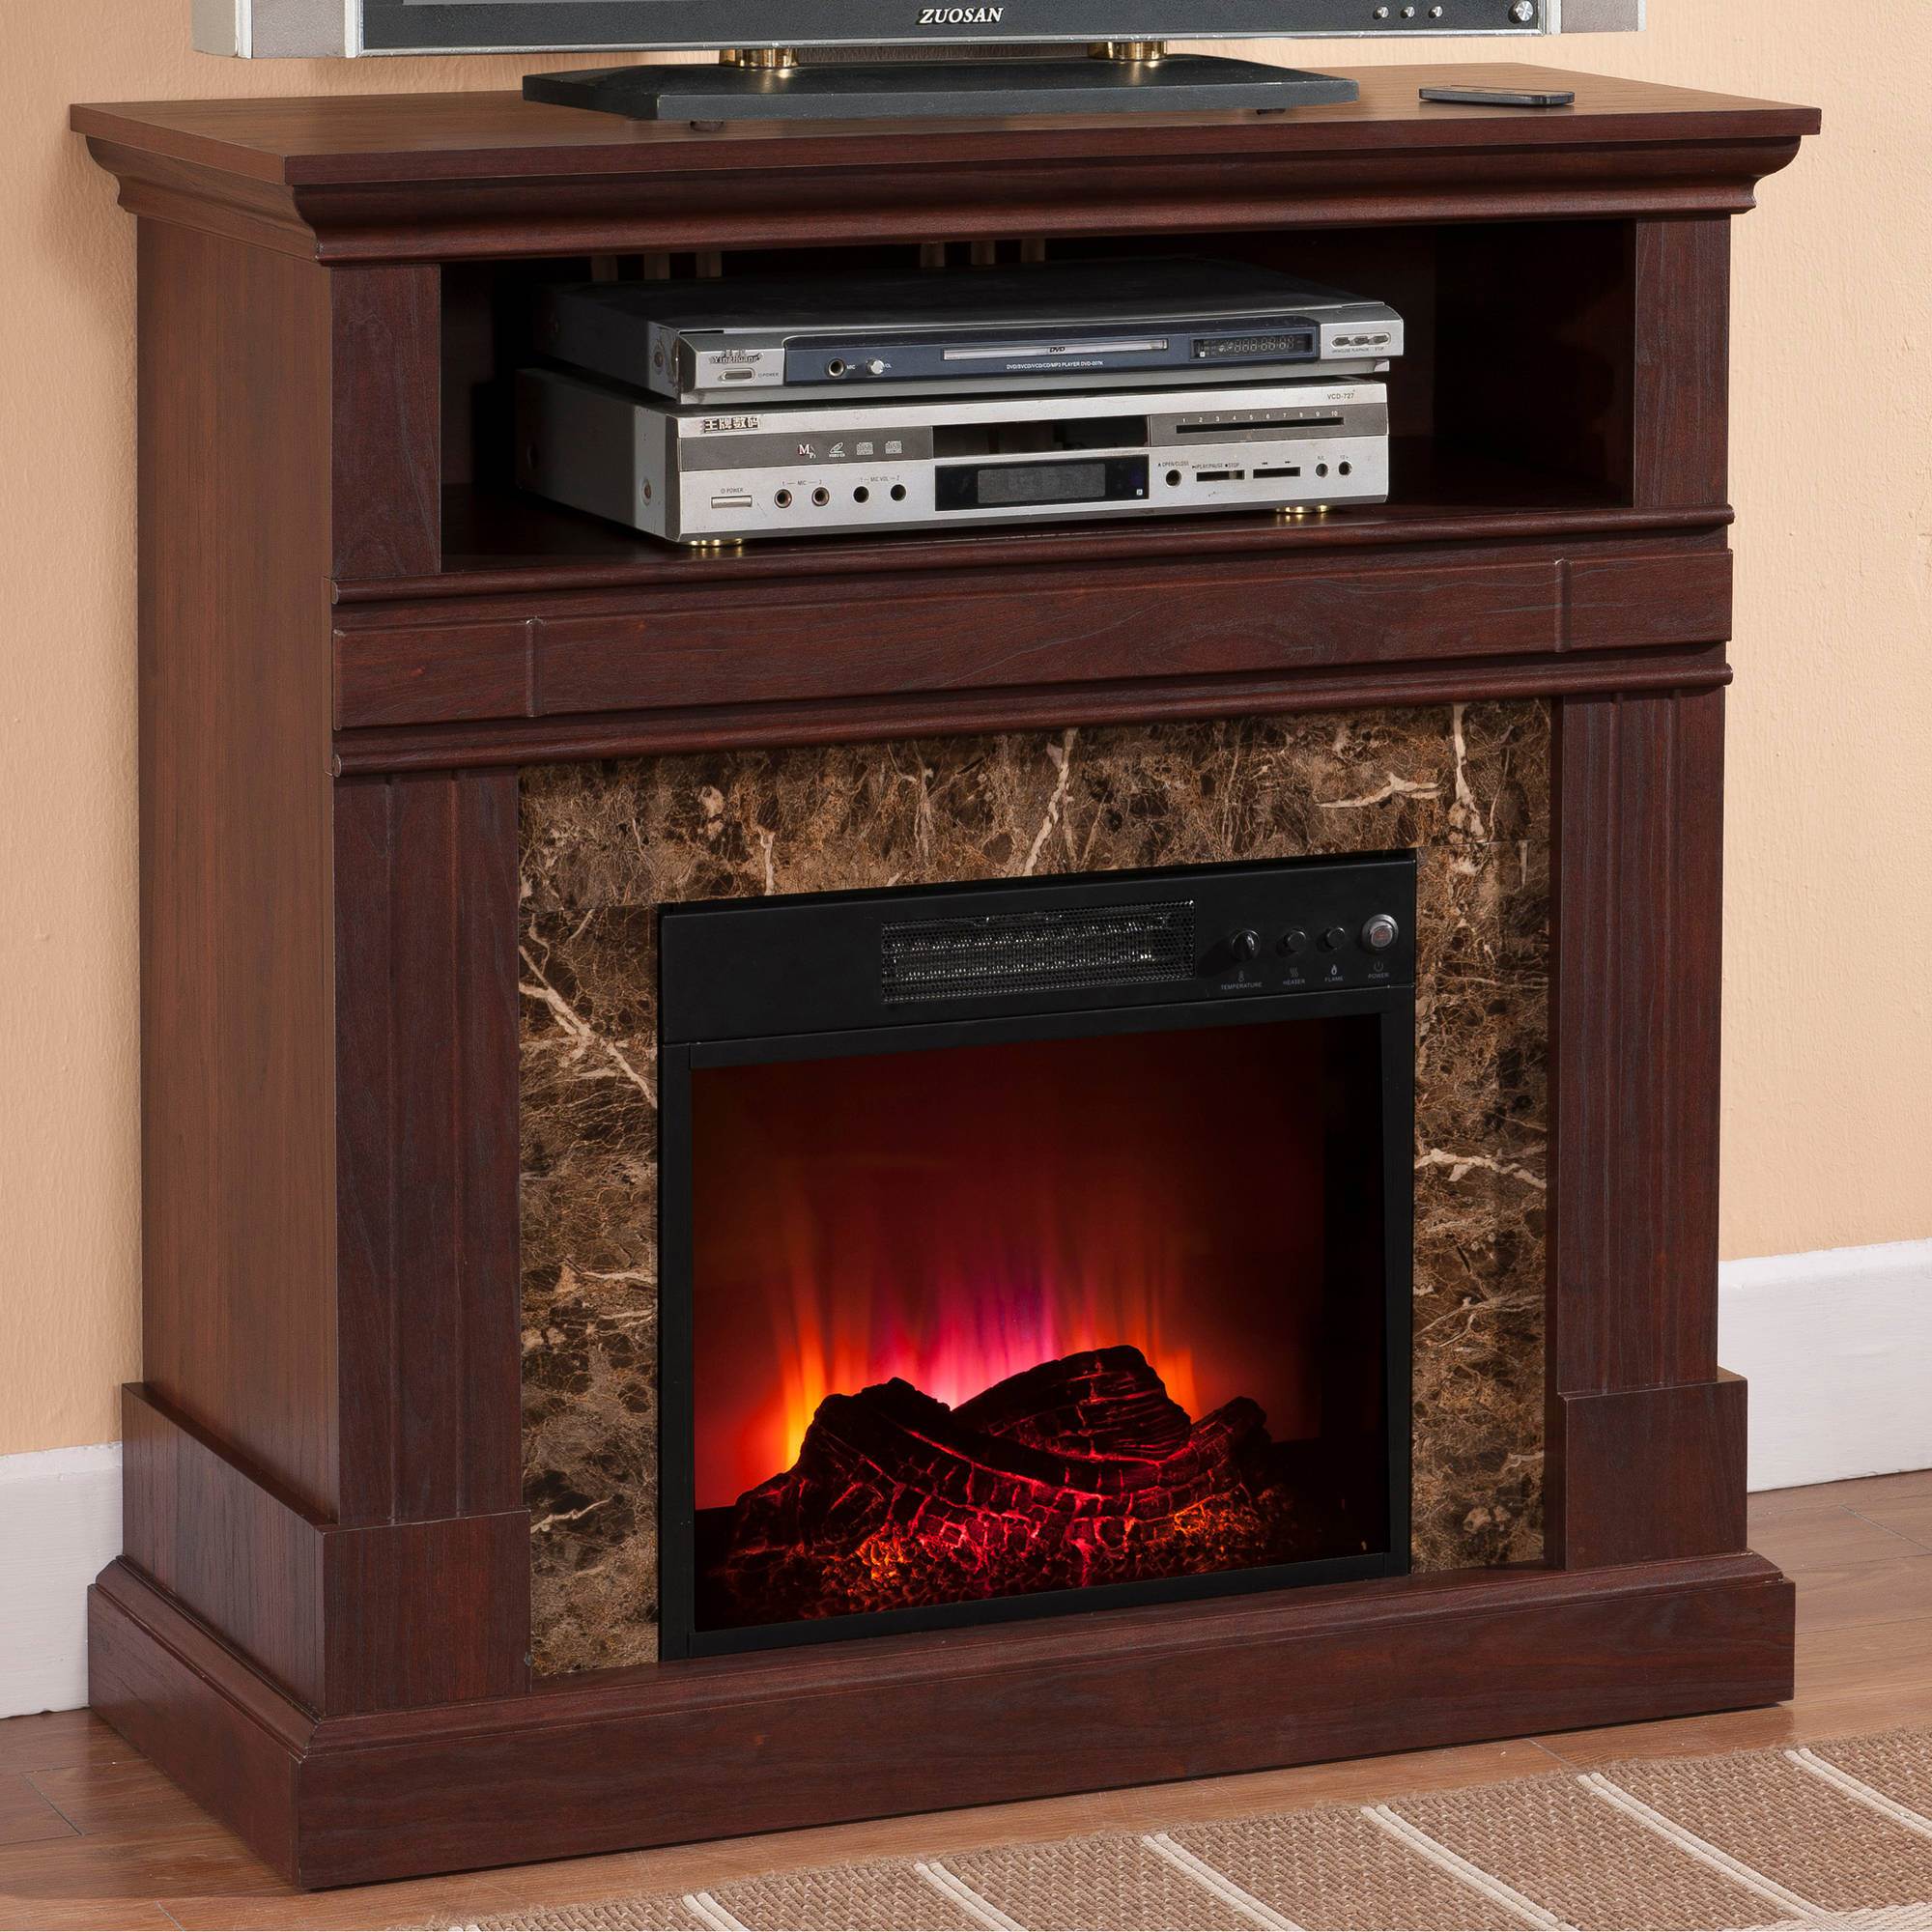 White Corner Electric Fireplace Tv Stand Awesome Corner Electric Fireplace Tv Stand